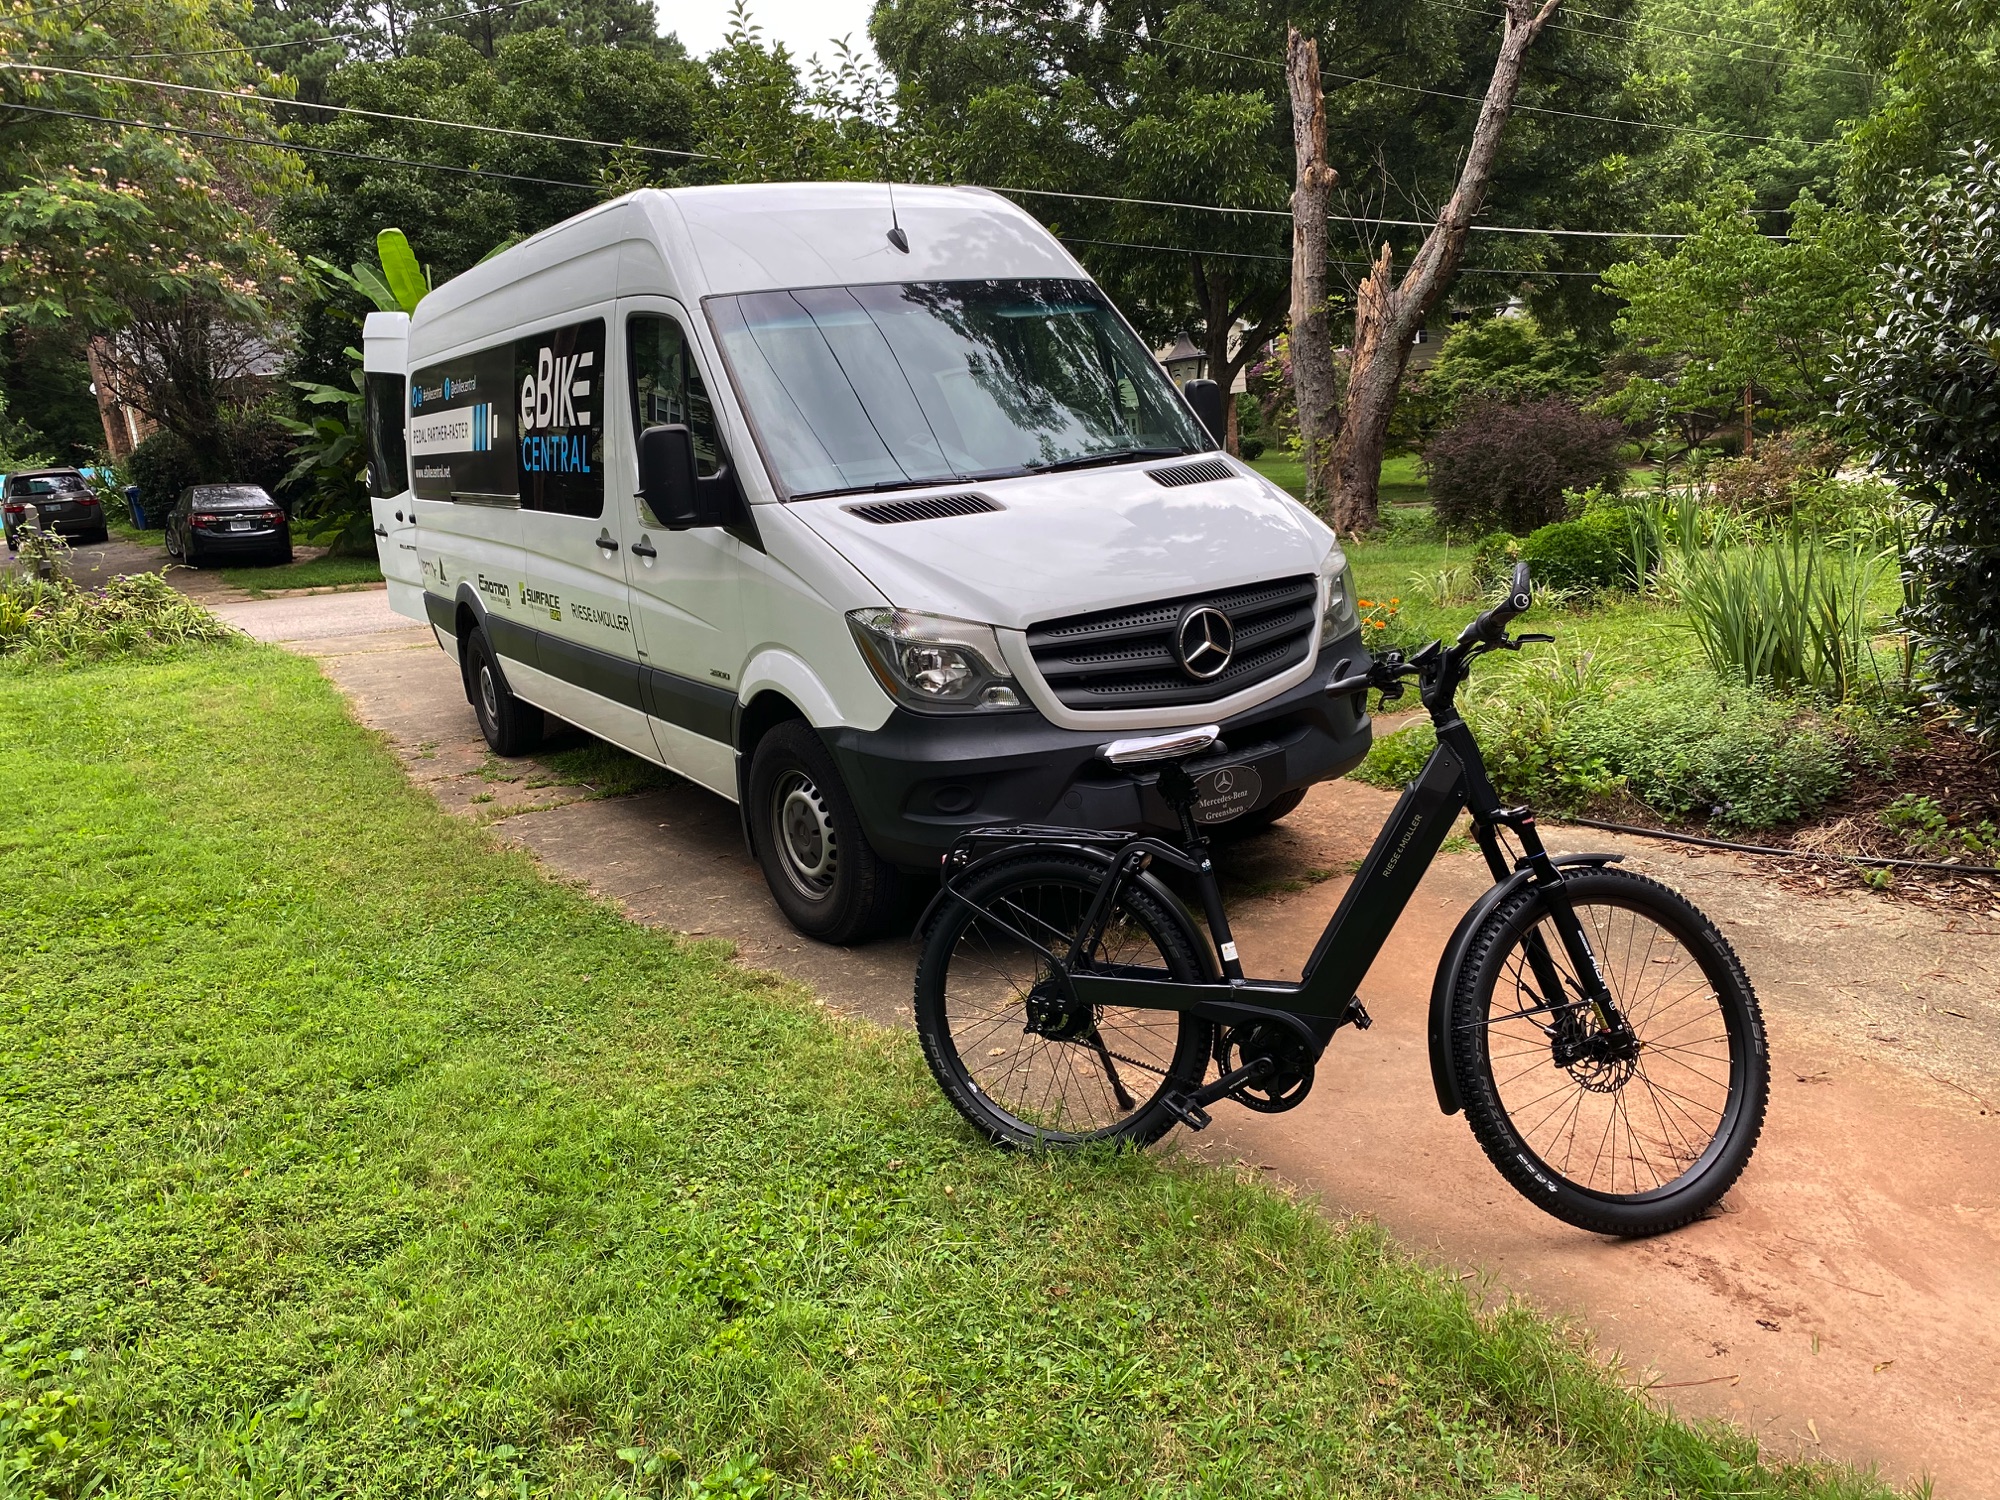 eBike Central Customer, Riese and Muller Nevo3